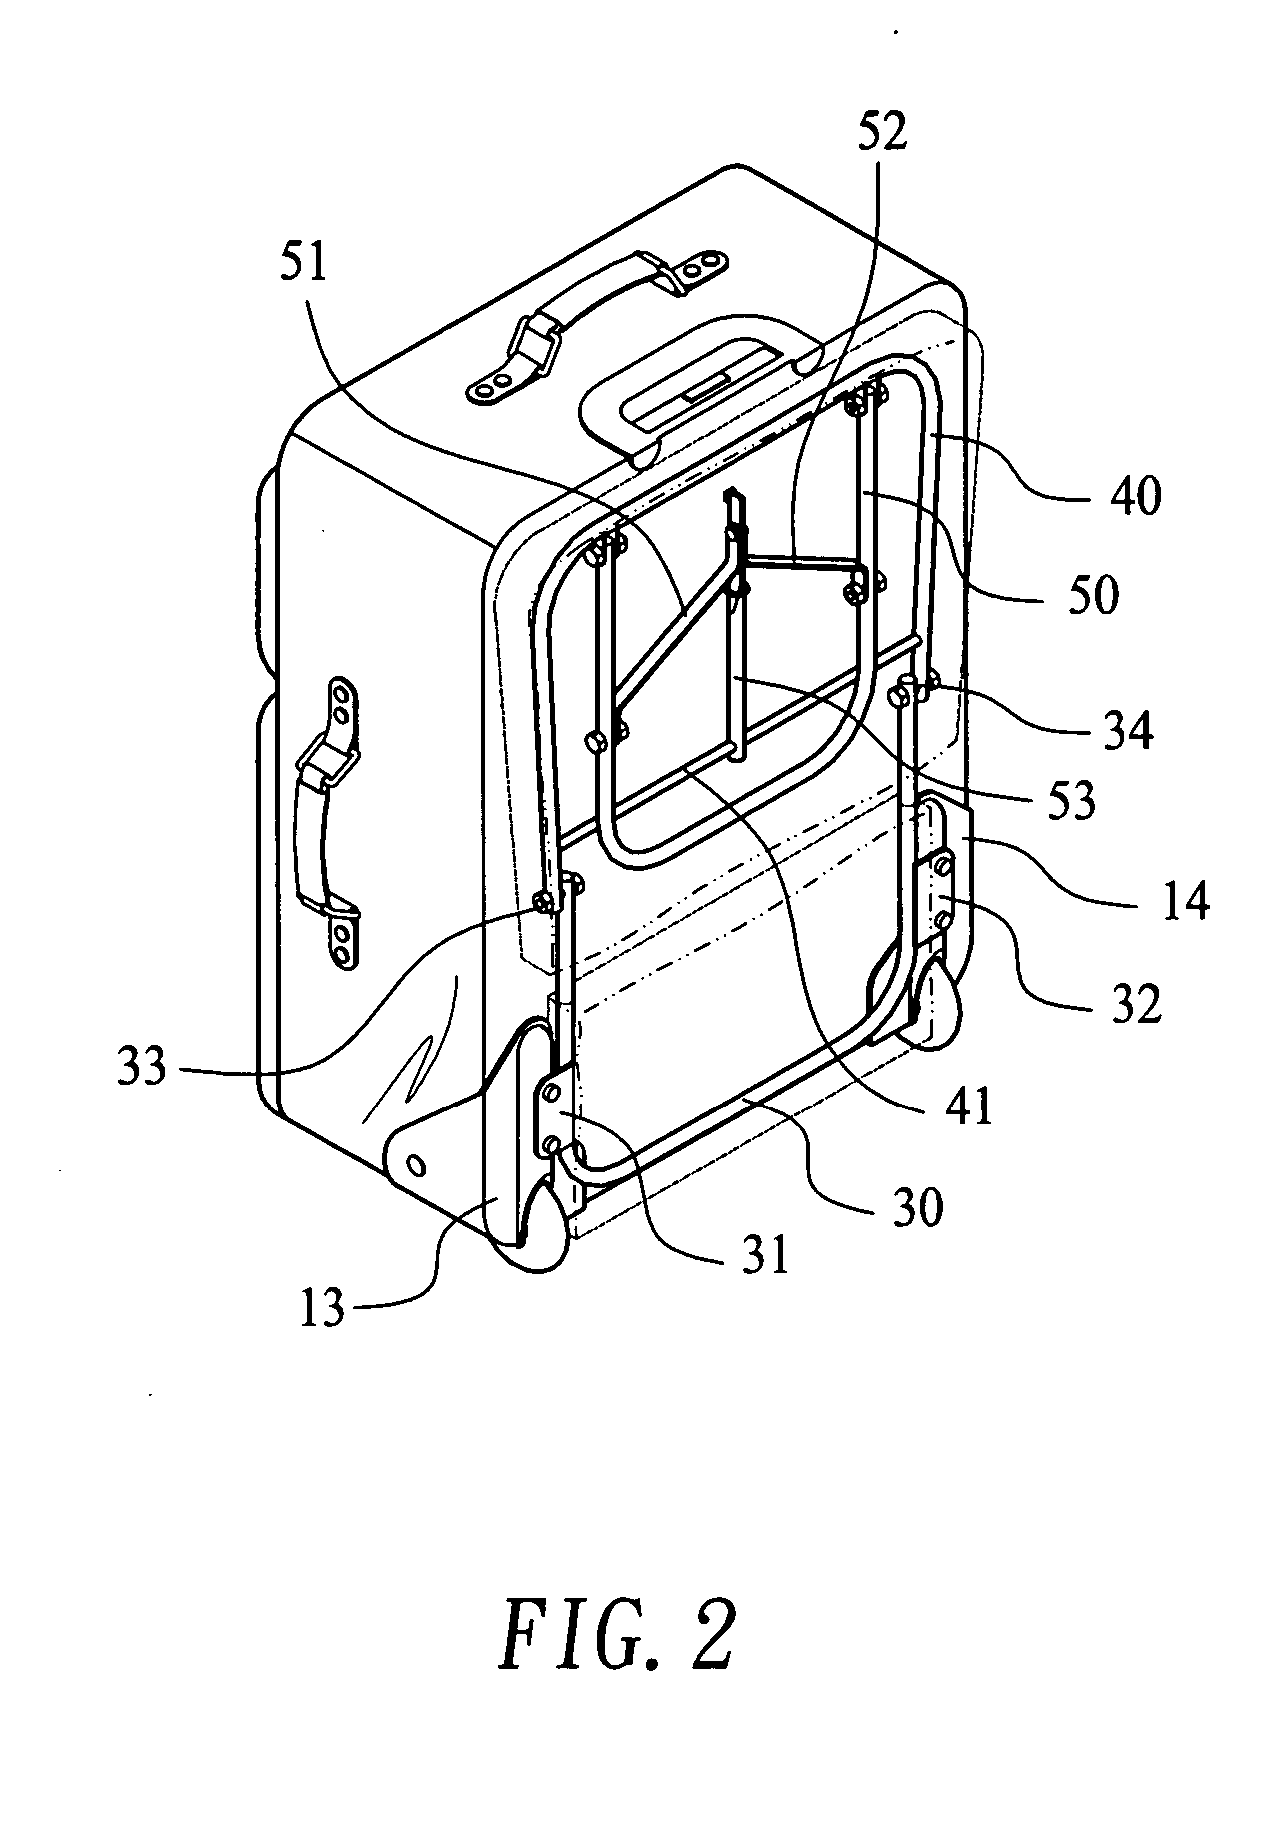 Carry-on baggage container with a folding chair